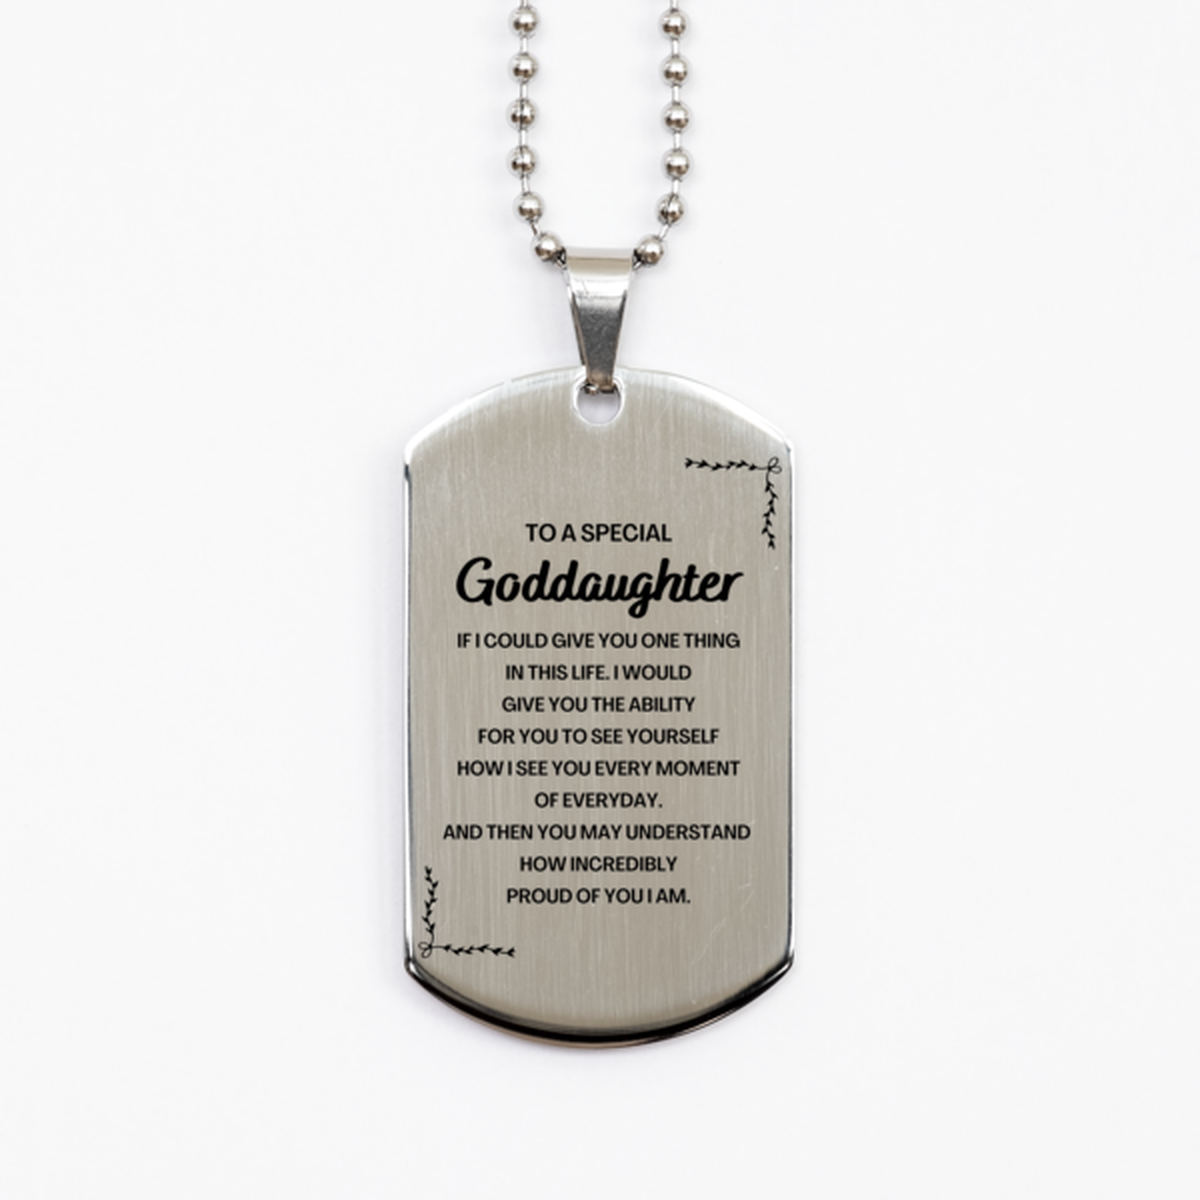 To My Goddaughter Silver Dog Tag, Gifts For Goddaughter Engraved, Inspirational Gifts for Christmas Birthday, Epic Gifts for Goddaughter To A Special Goddaughter how incredibly proud of you I am